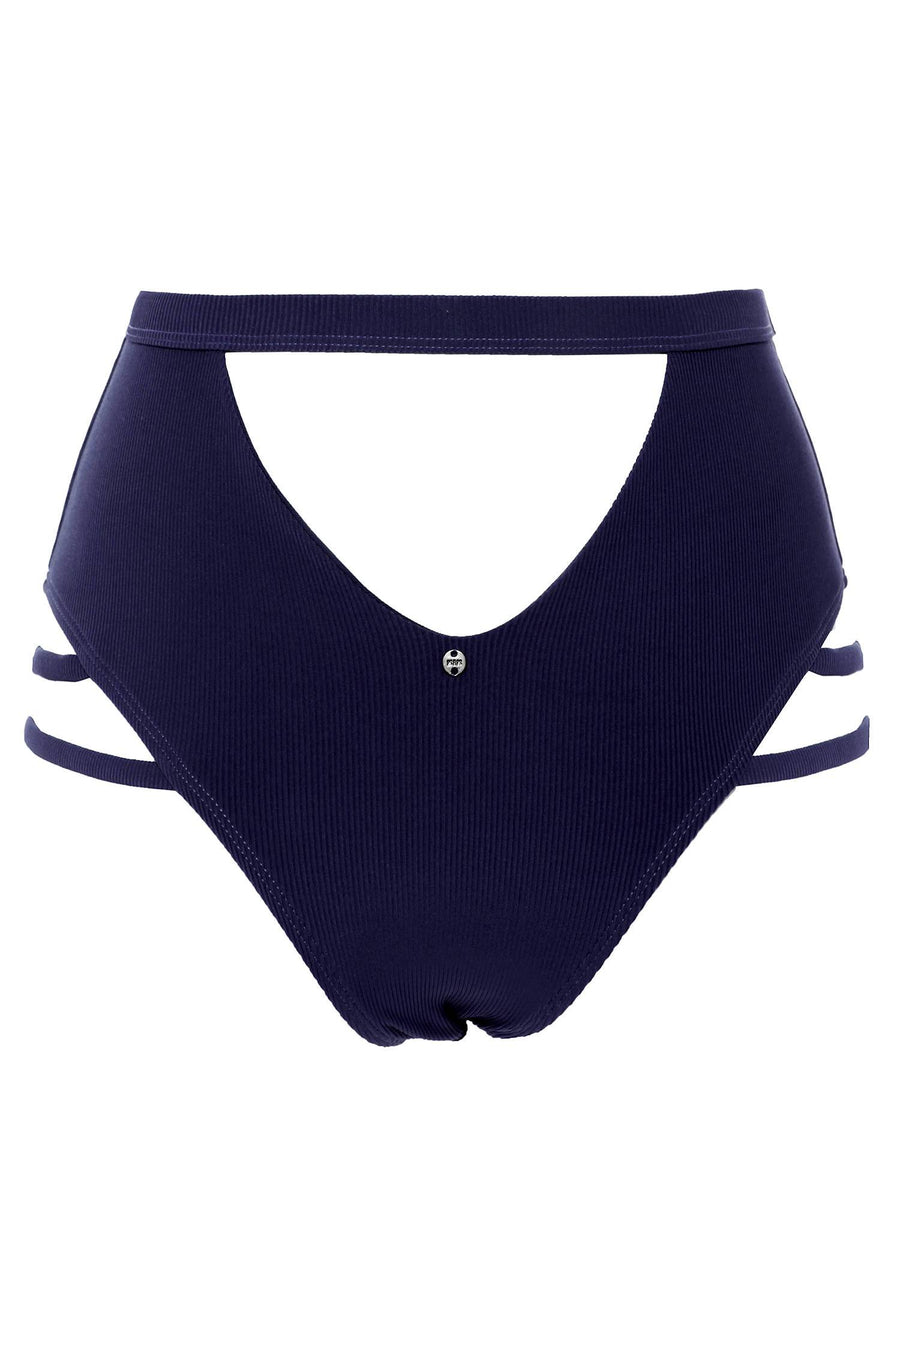 The Valley Bottoms - Ribbed Navy Shorts